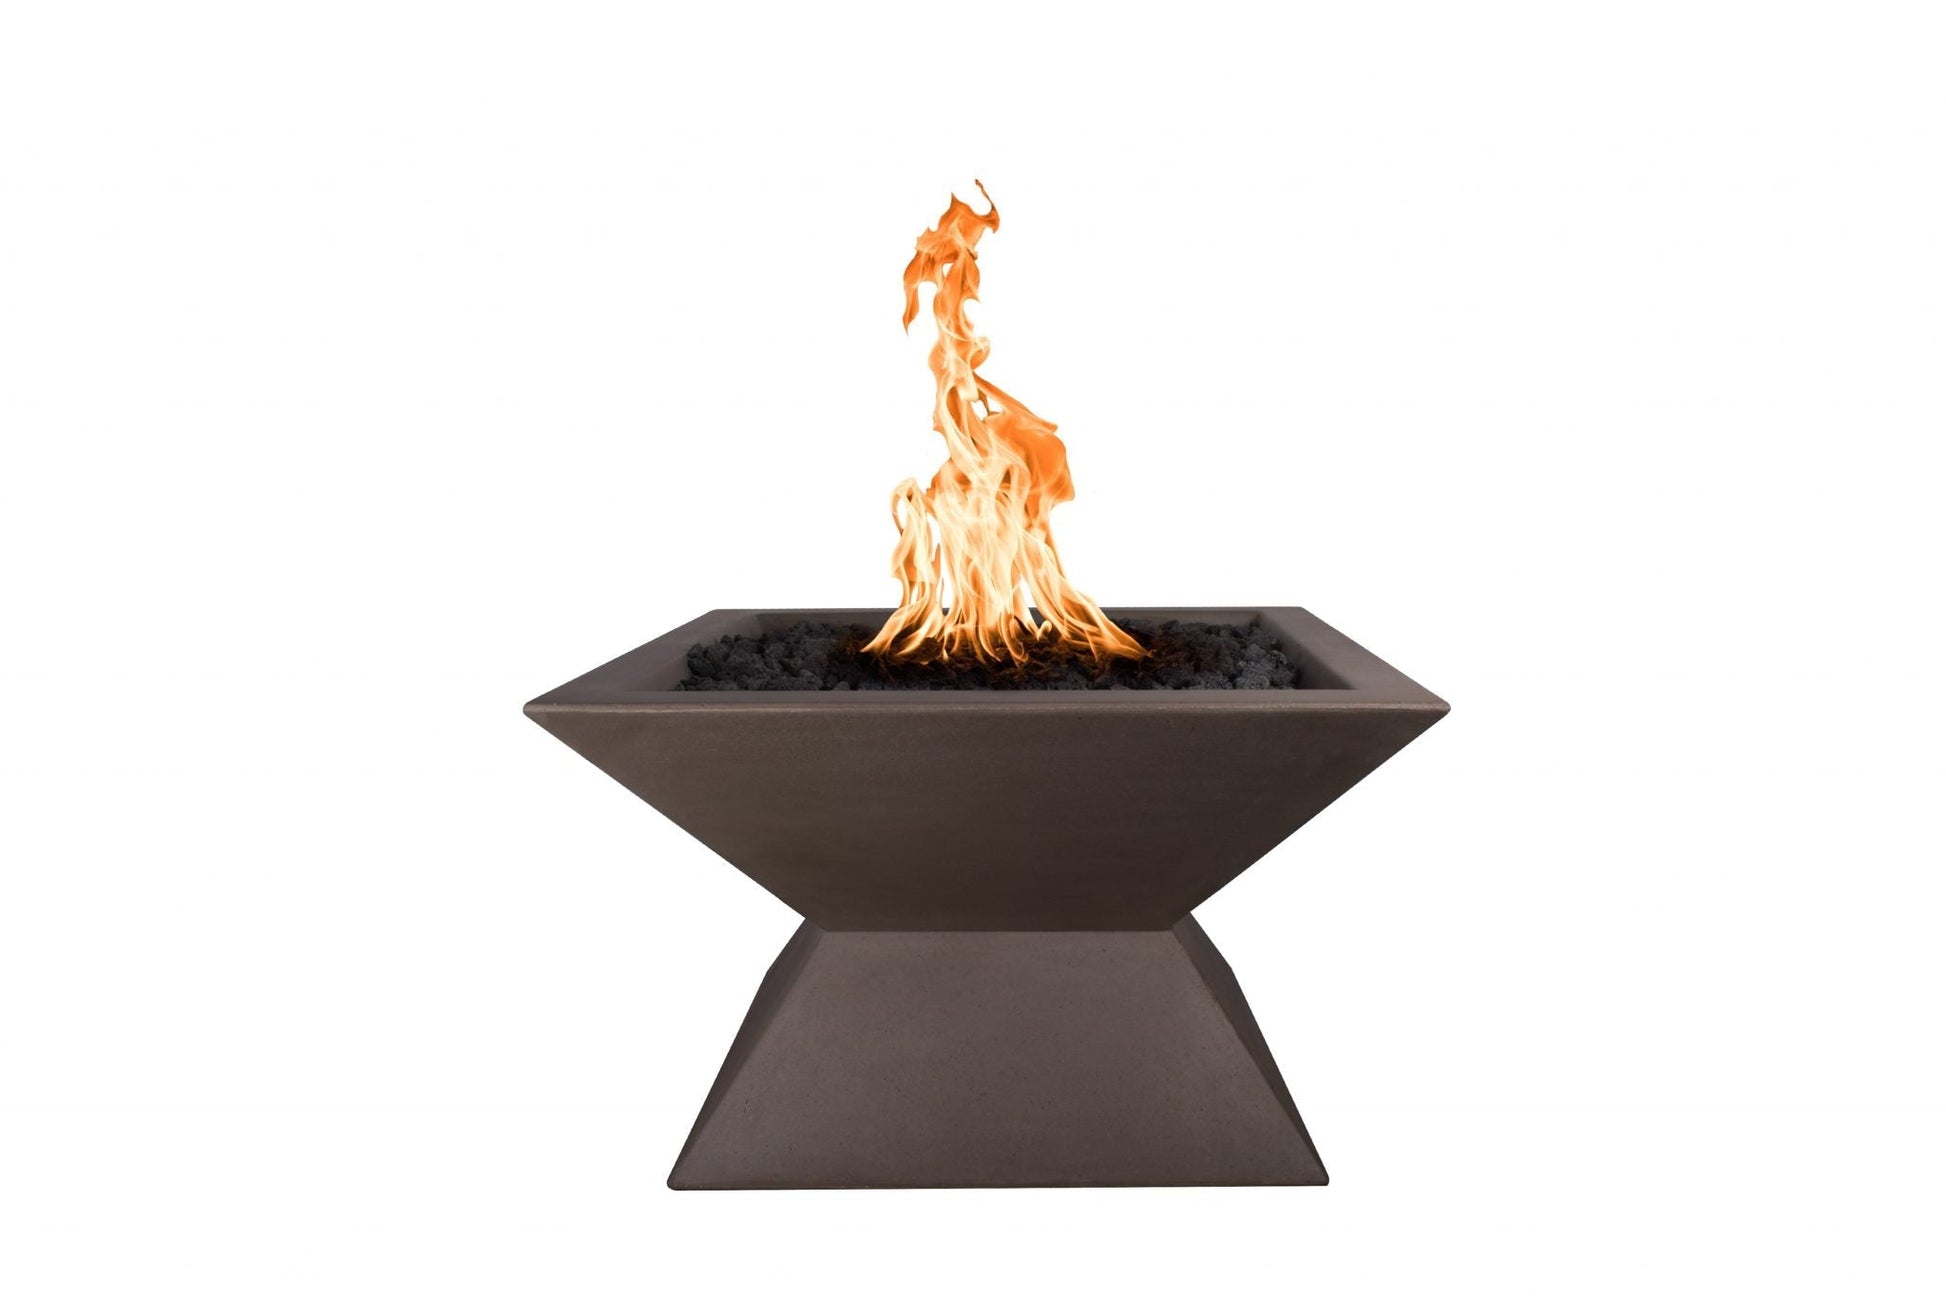 The Outdoor Plus Square Uxmal 30" Rustic Moss Stone GFRC Concrete Liquid Propane Fire Pit with Match Lit Ignition